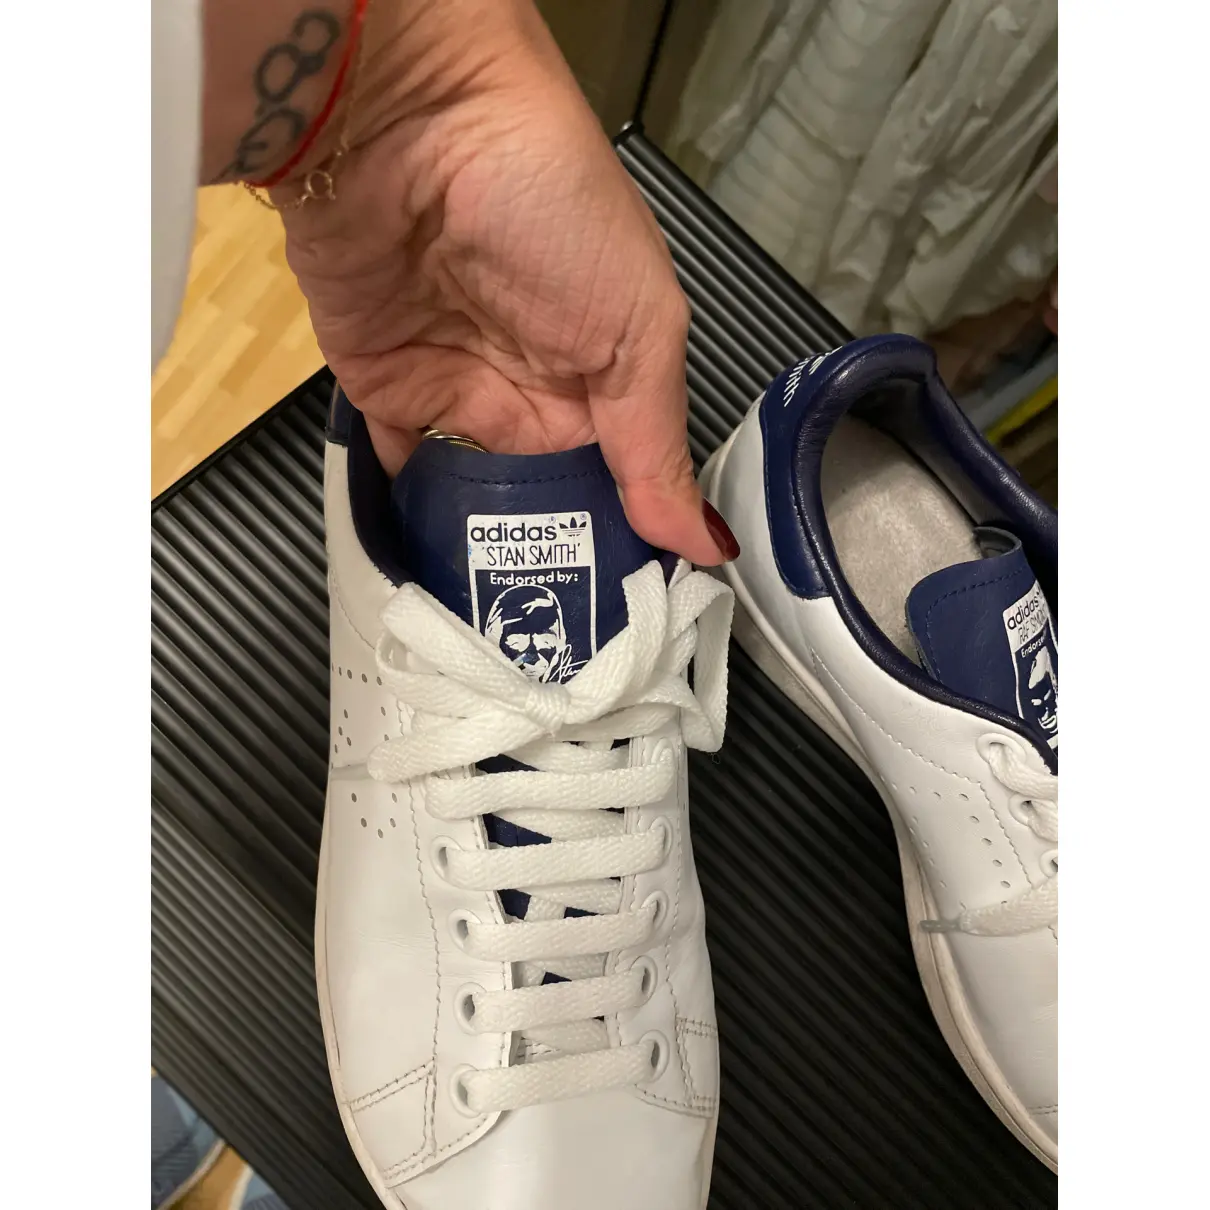 Buy Adidas x Raf Simons Stan Smith leather trainers online